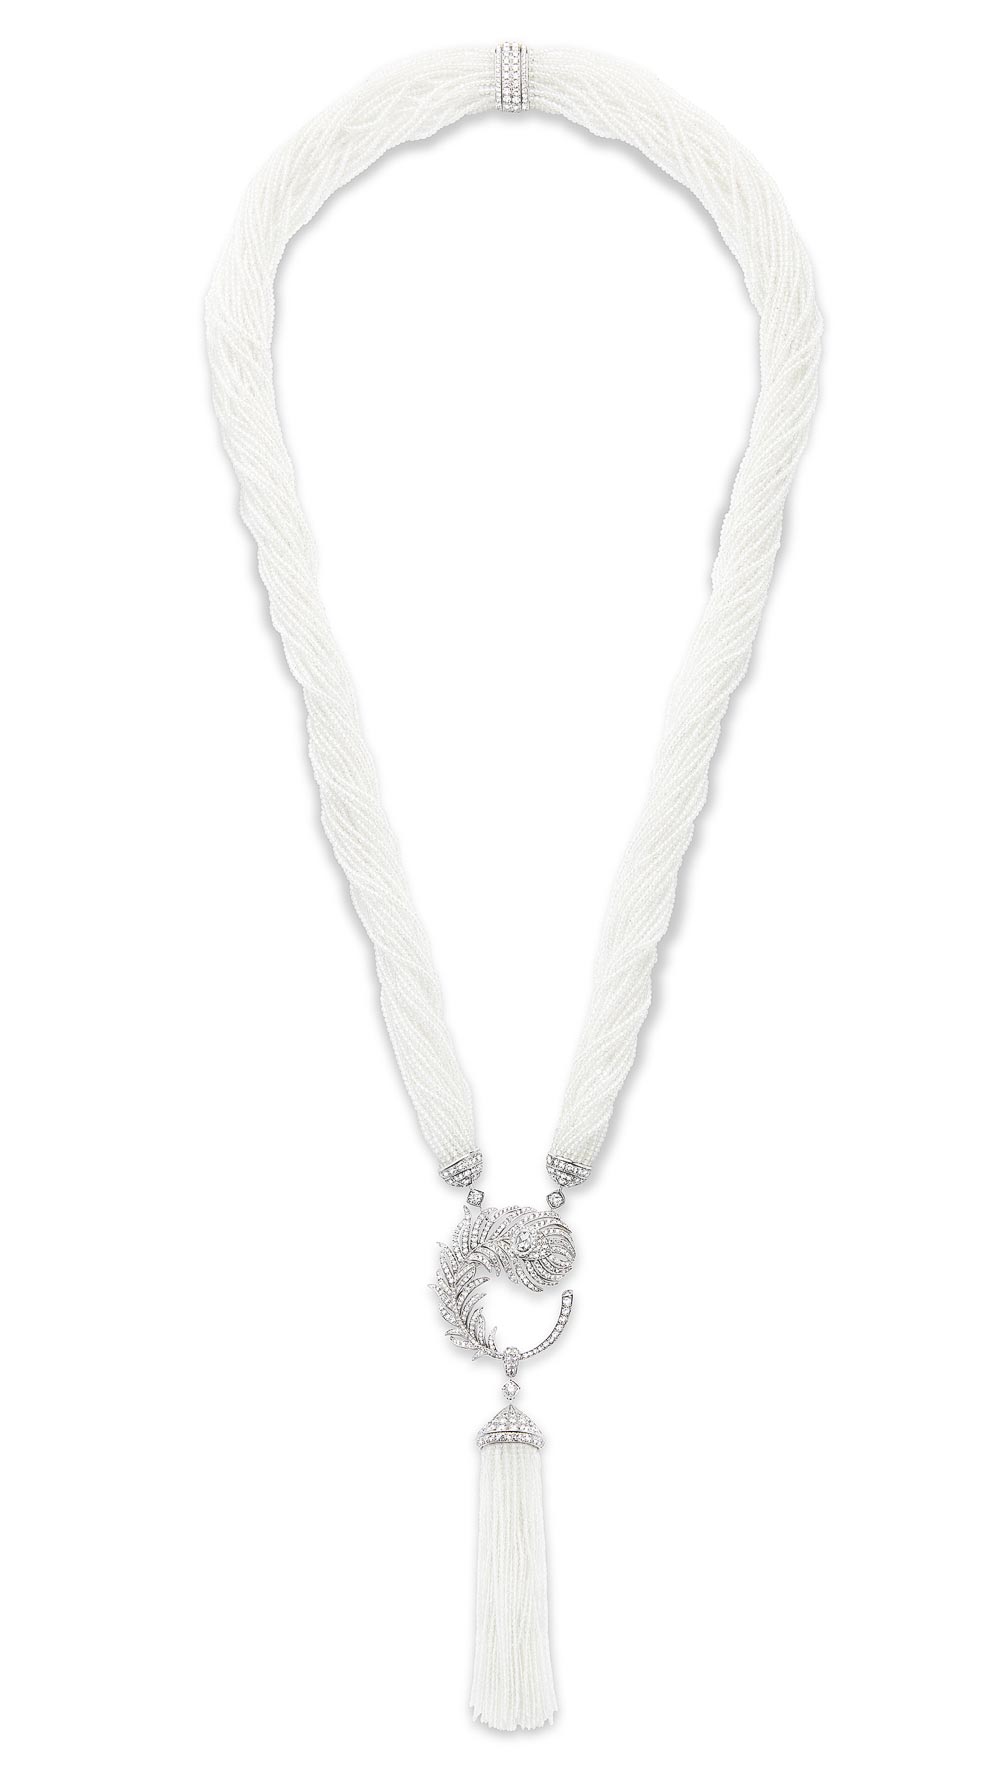  - Boucheron Plume de Paon long necklace, set with an oval rose-cut diamond and white topaz, paved with diamonds, in white gold